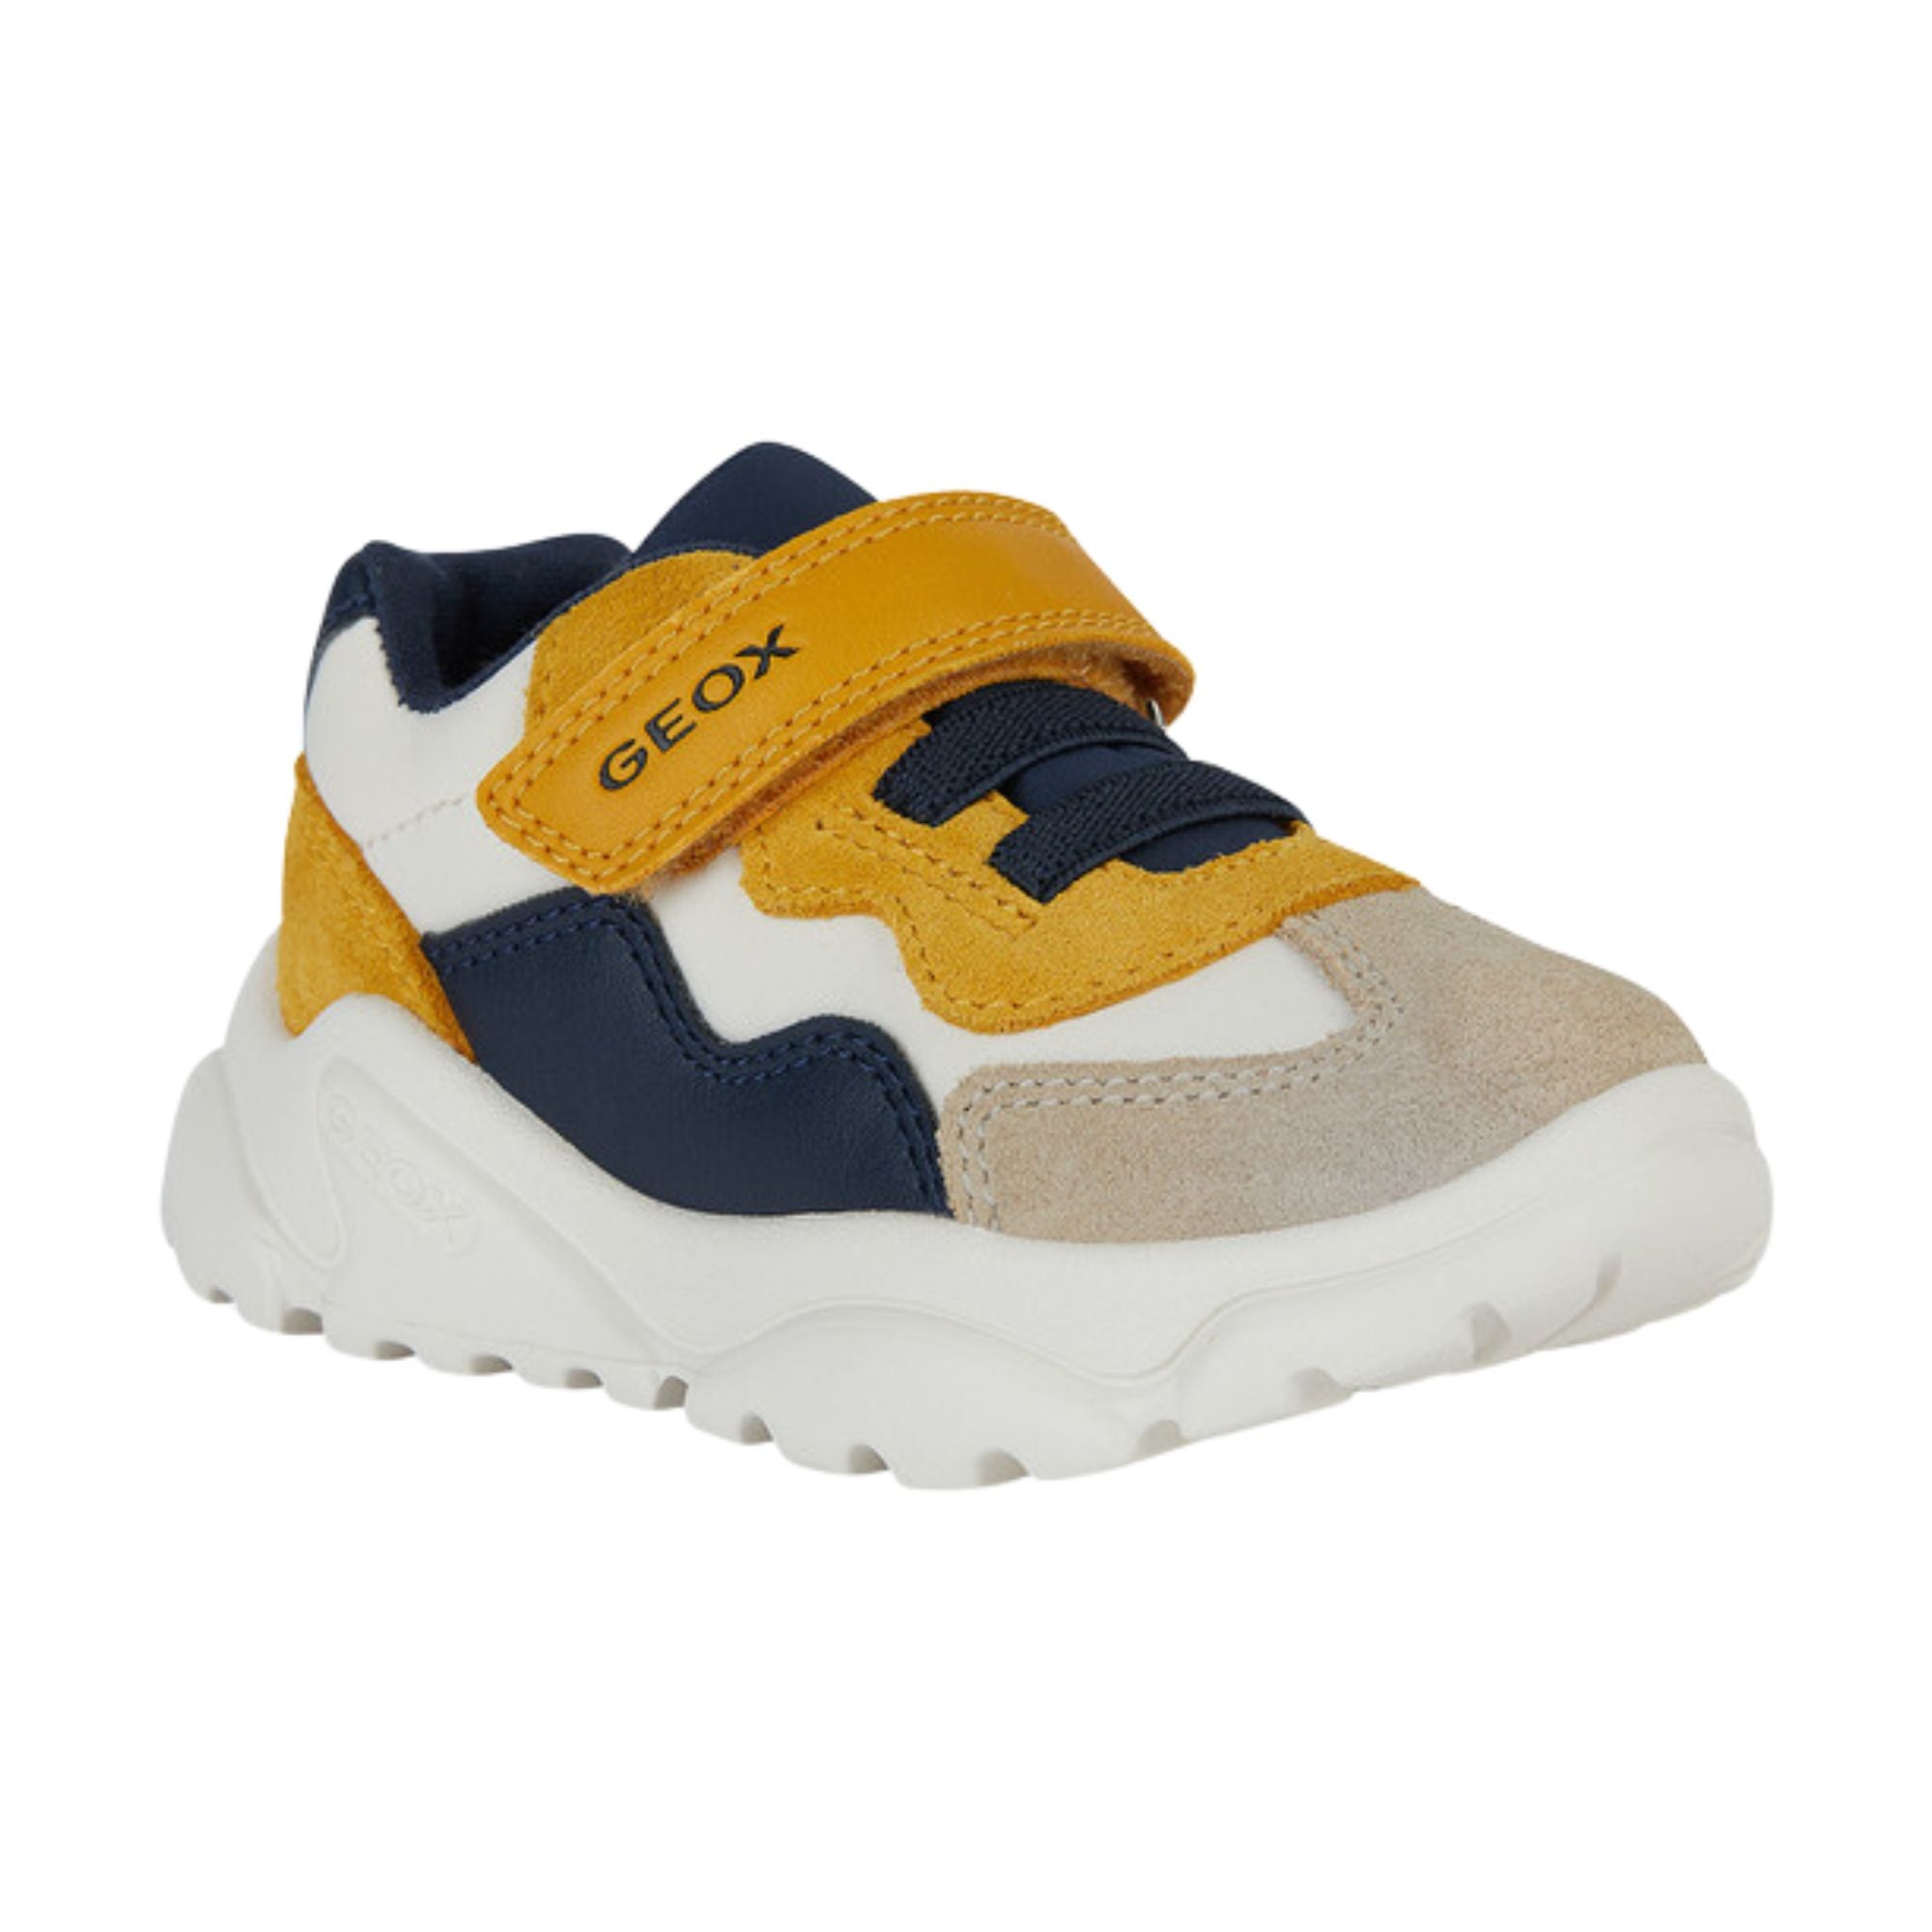 Geox Baby Boy Ciufciuf Yellow Sneakers